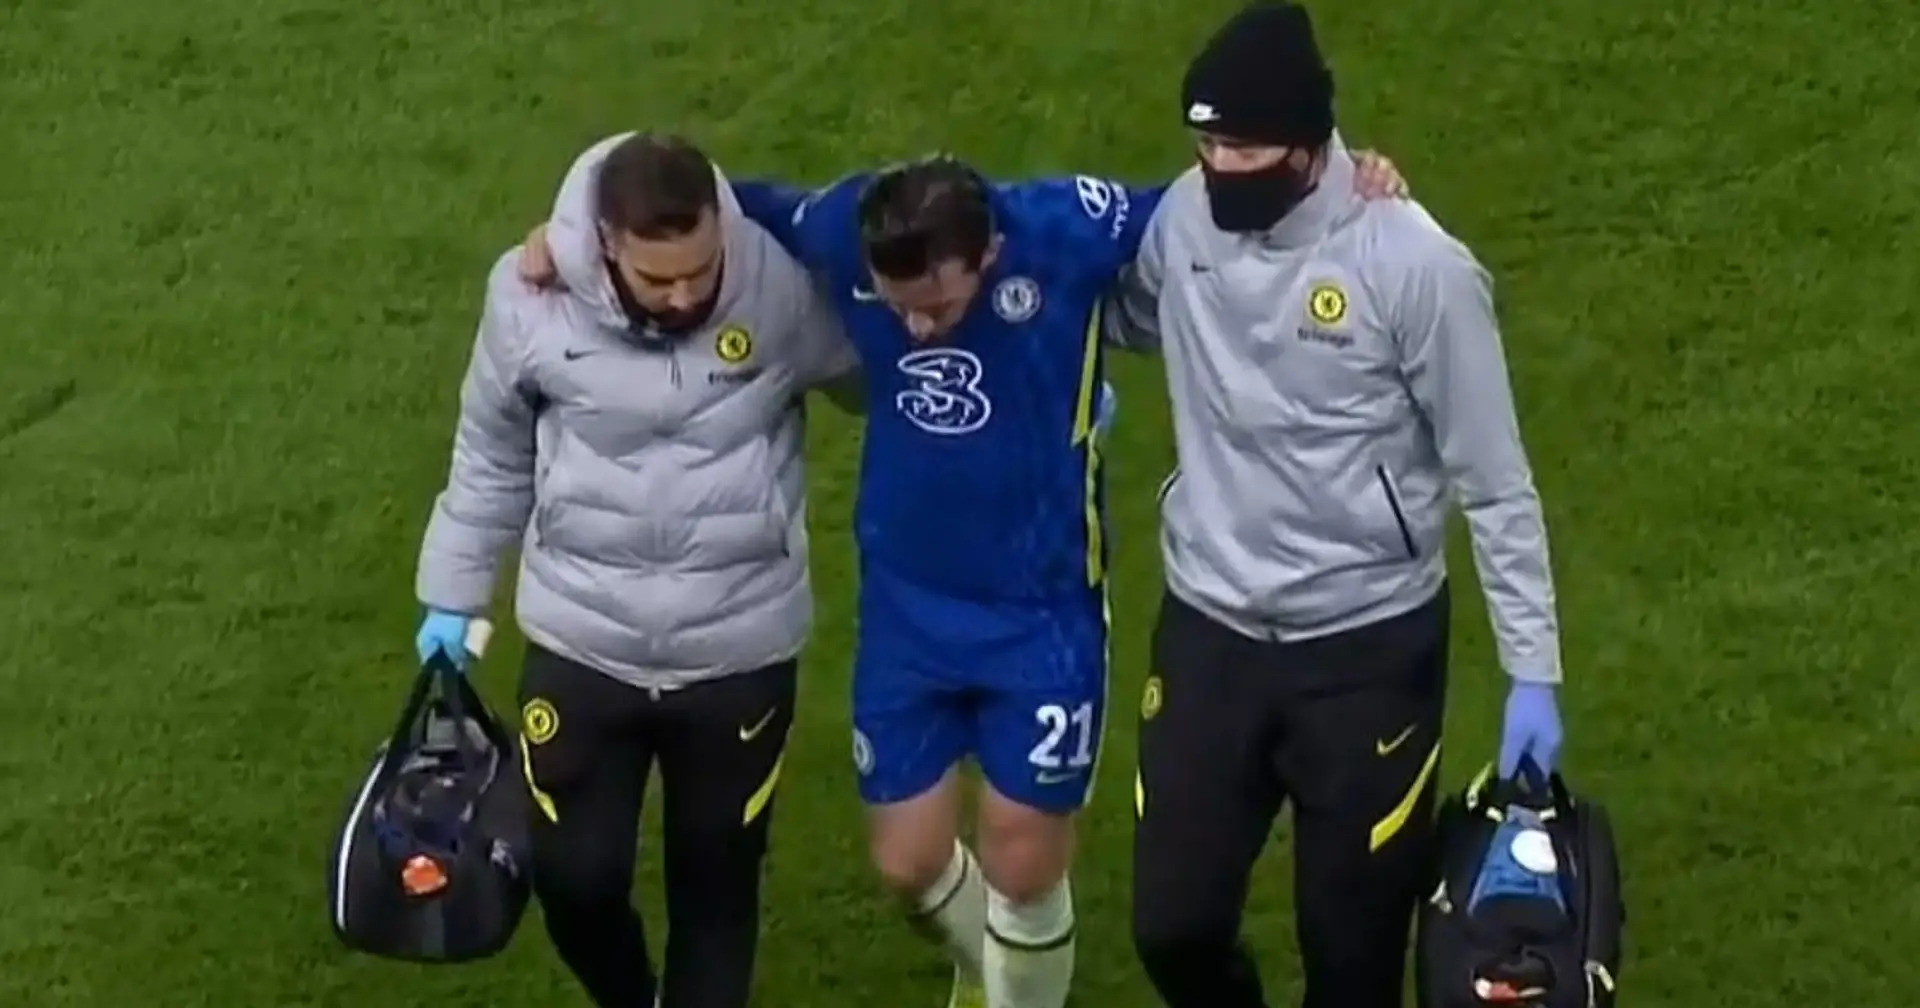 'It's very sad': Tuchel issues injury update on Chilwell, Kante